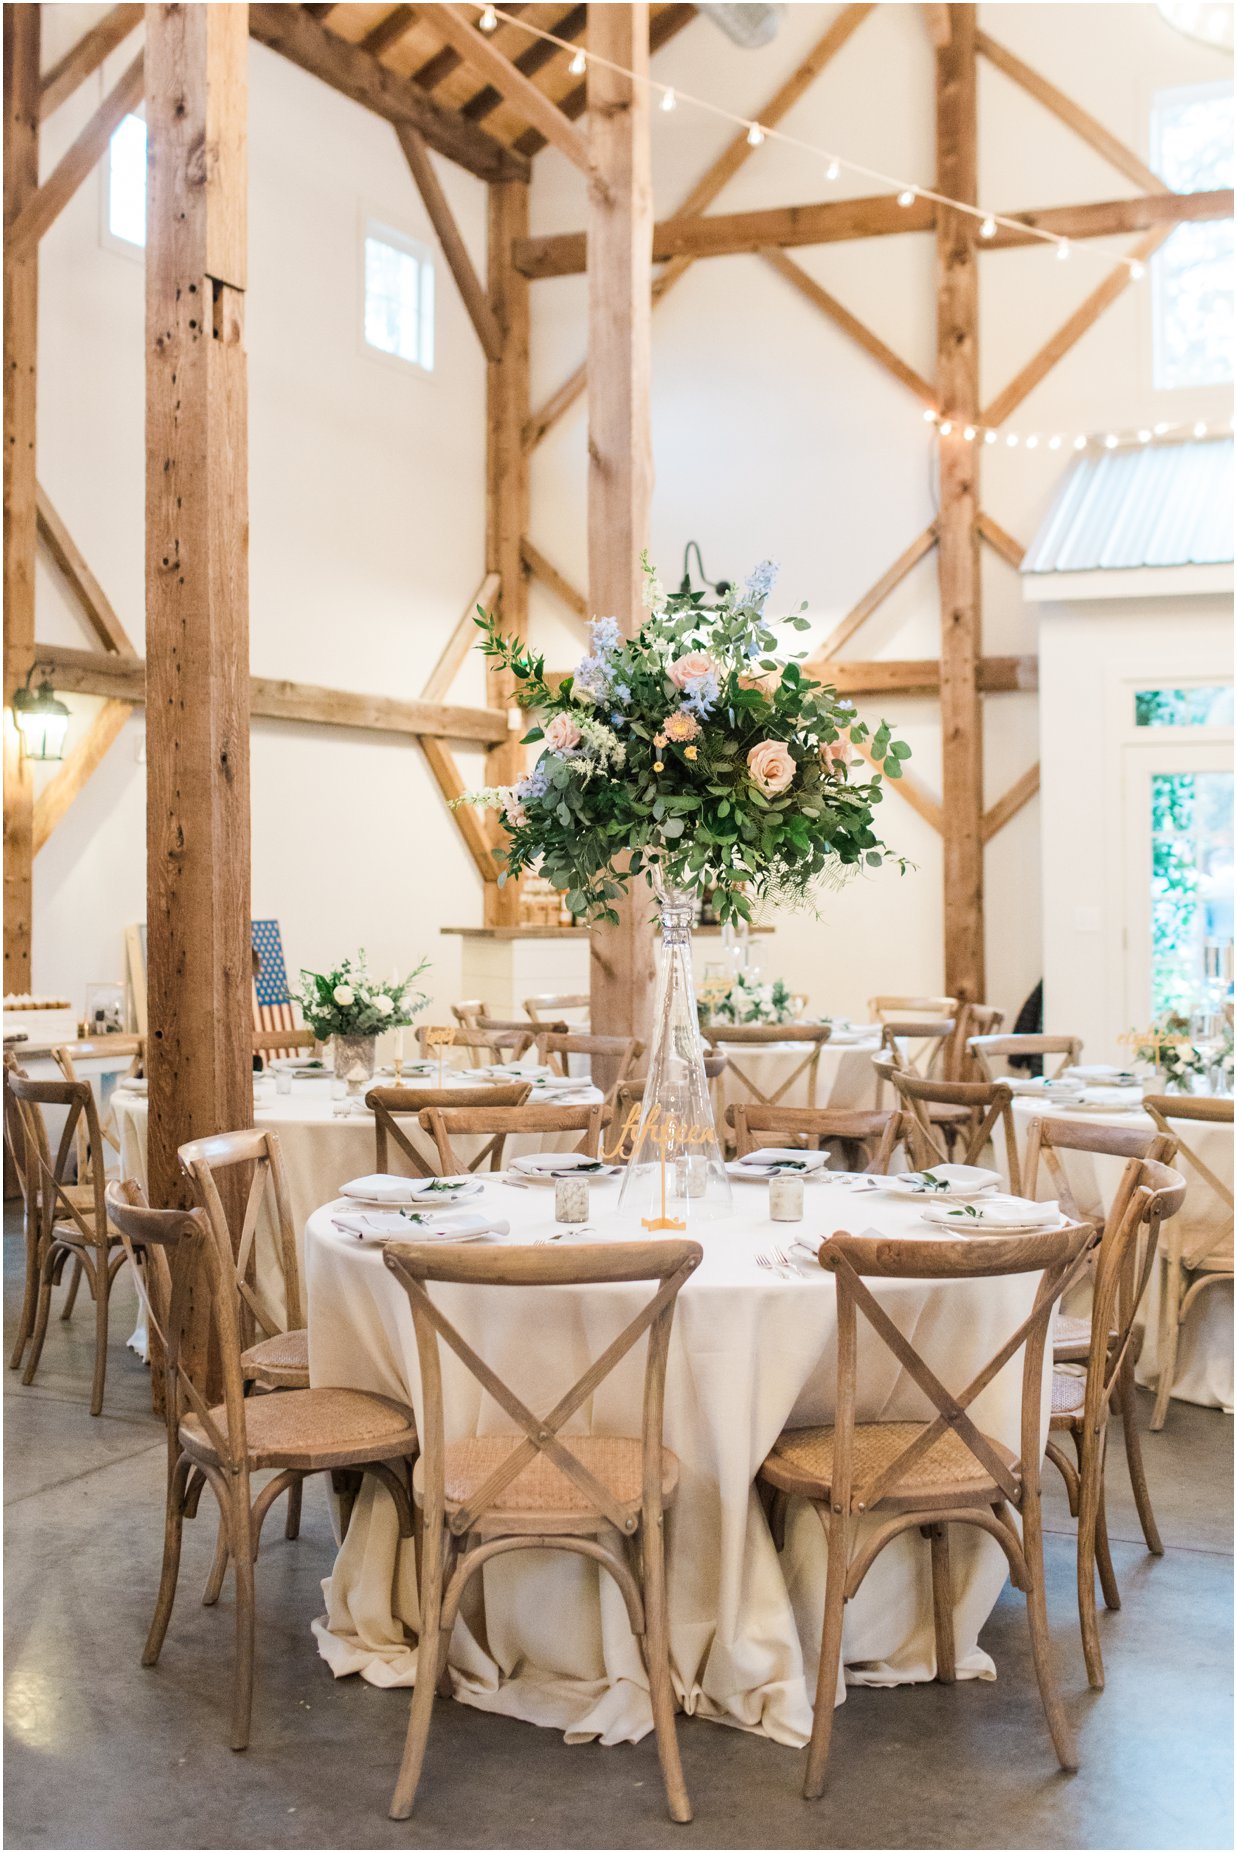 The Barn of Chapel Hill reception